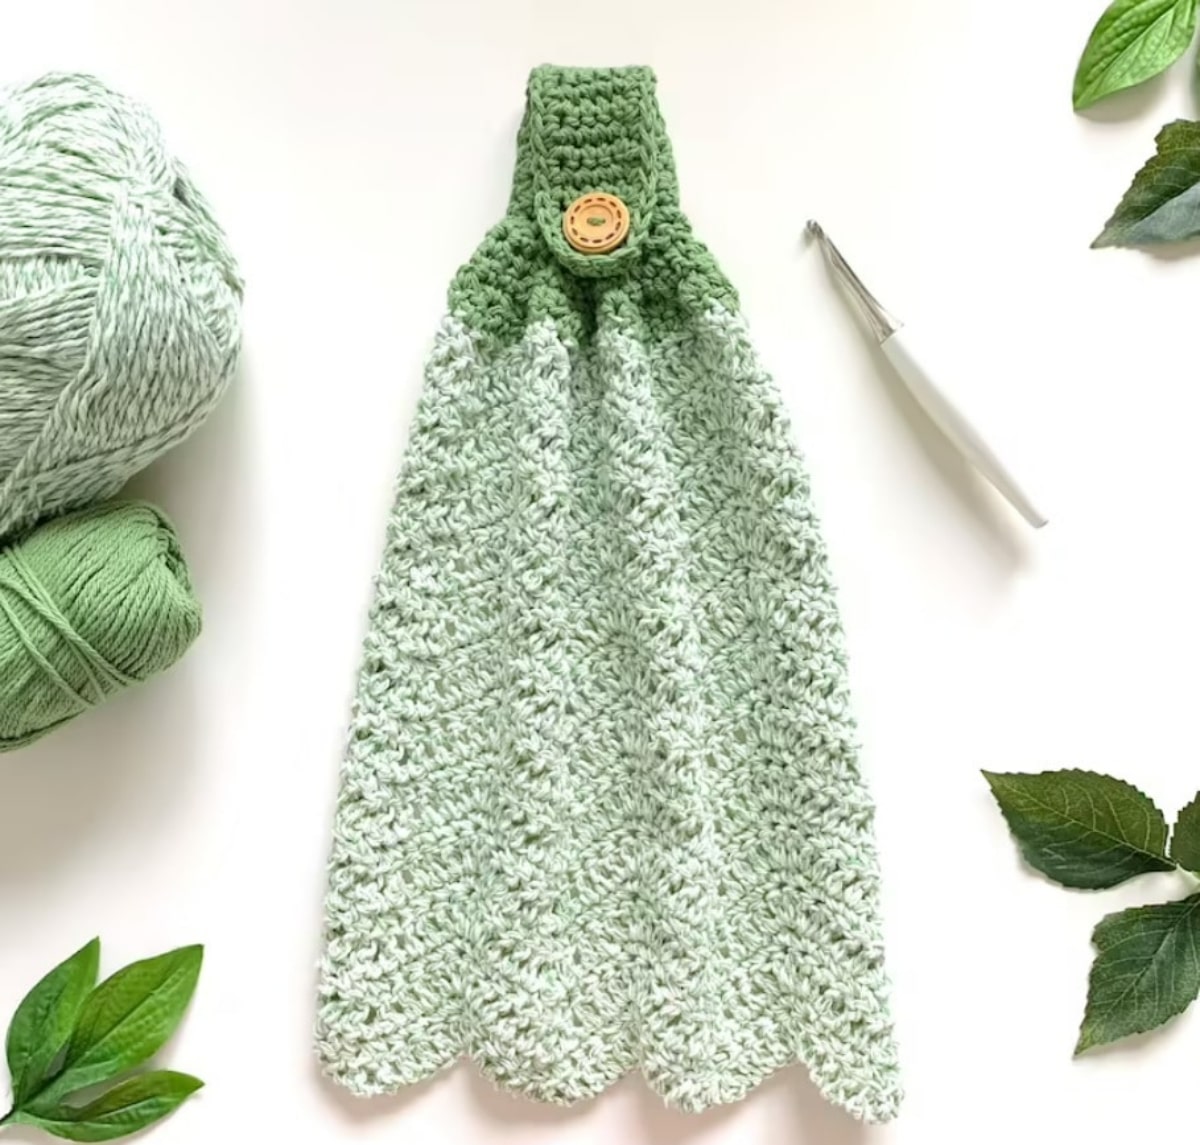 A light green crochet hand towel with a scalloped edging and a dark green loop with a button at the top.